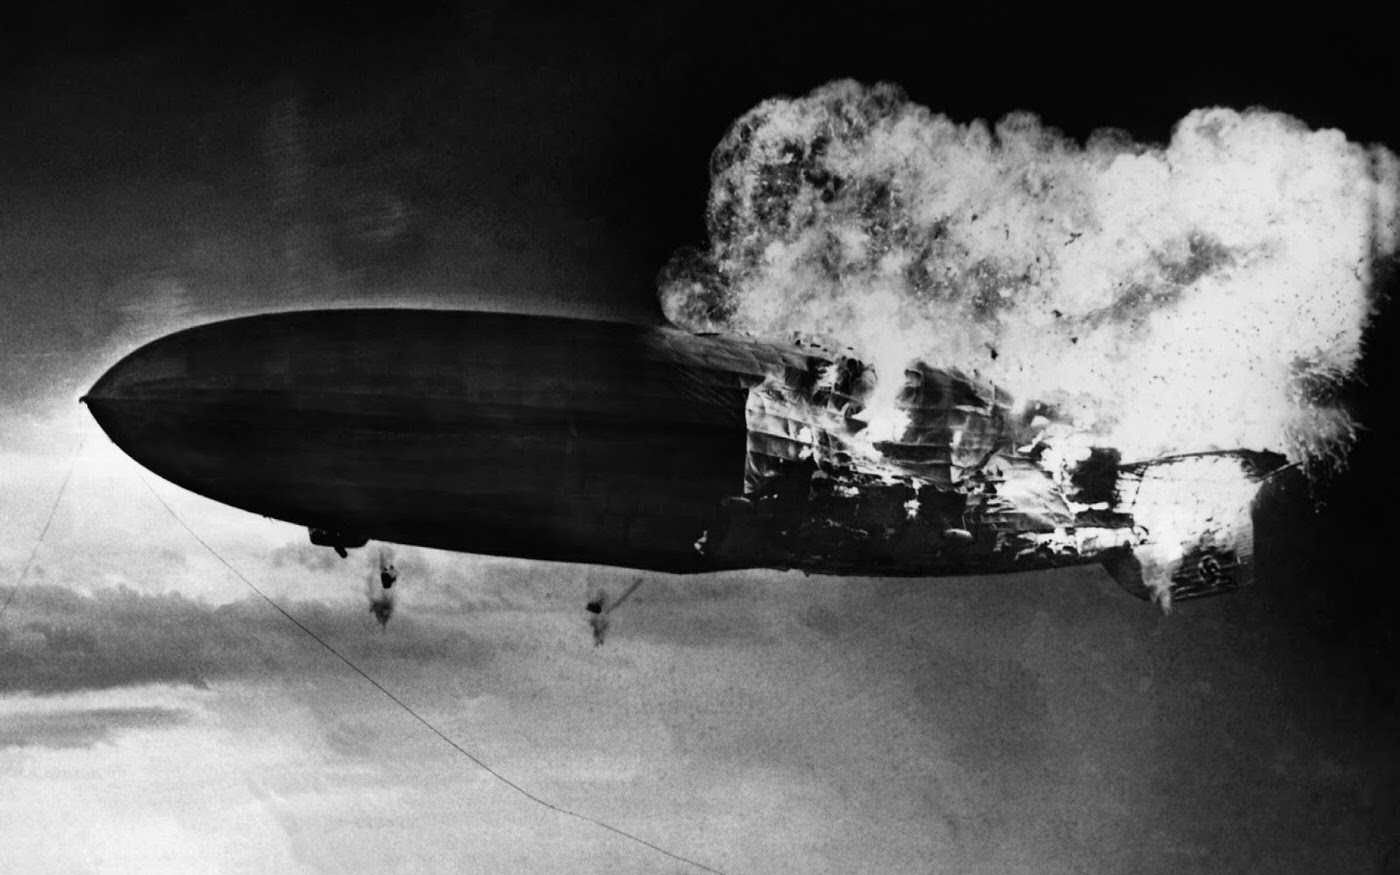 The fire was blamed on a spark that caused the Zeppelin’s hydrogen to ignite